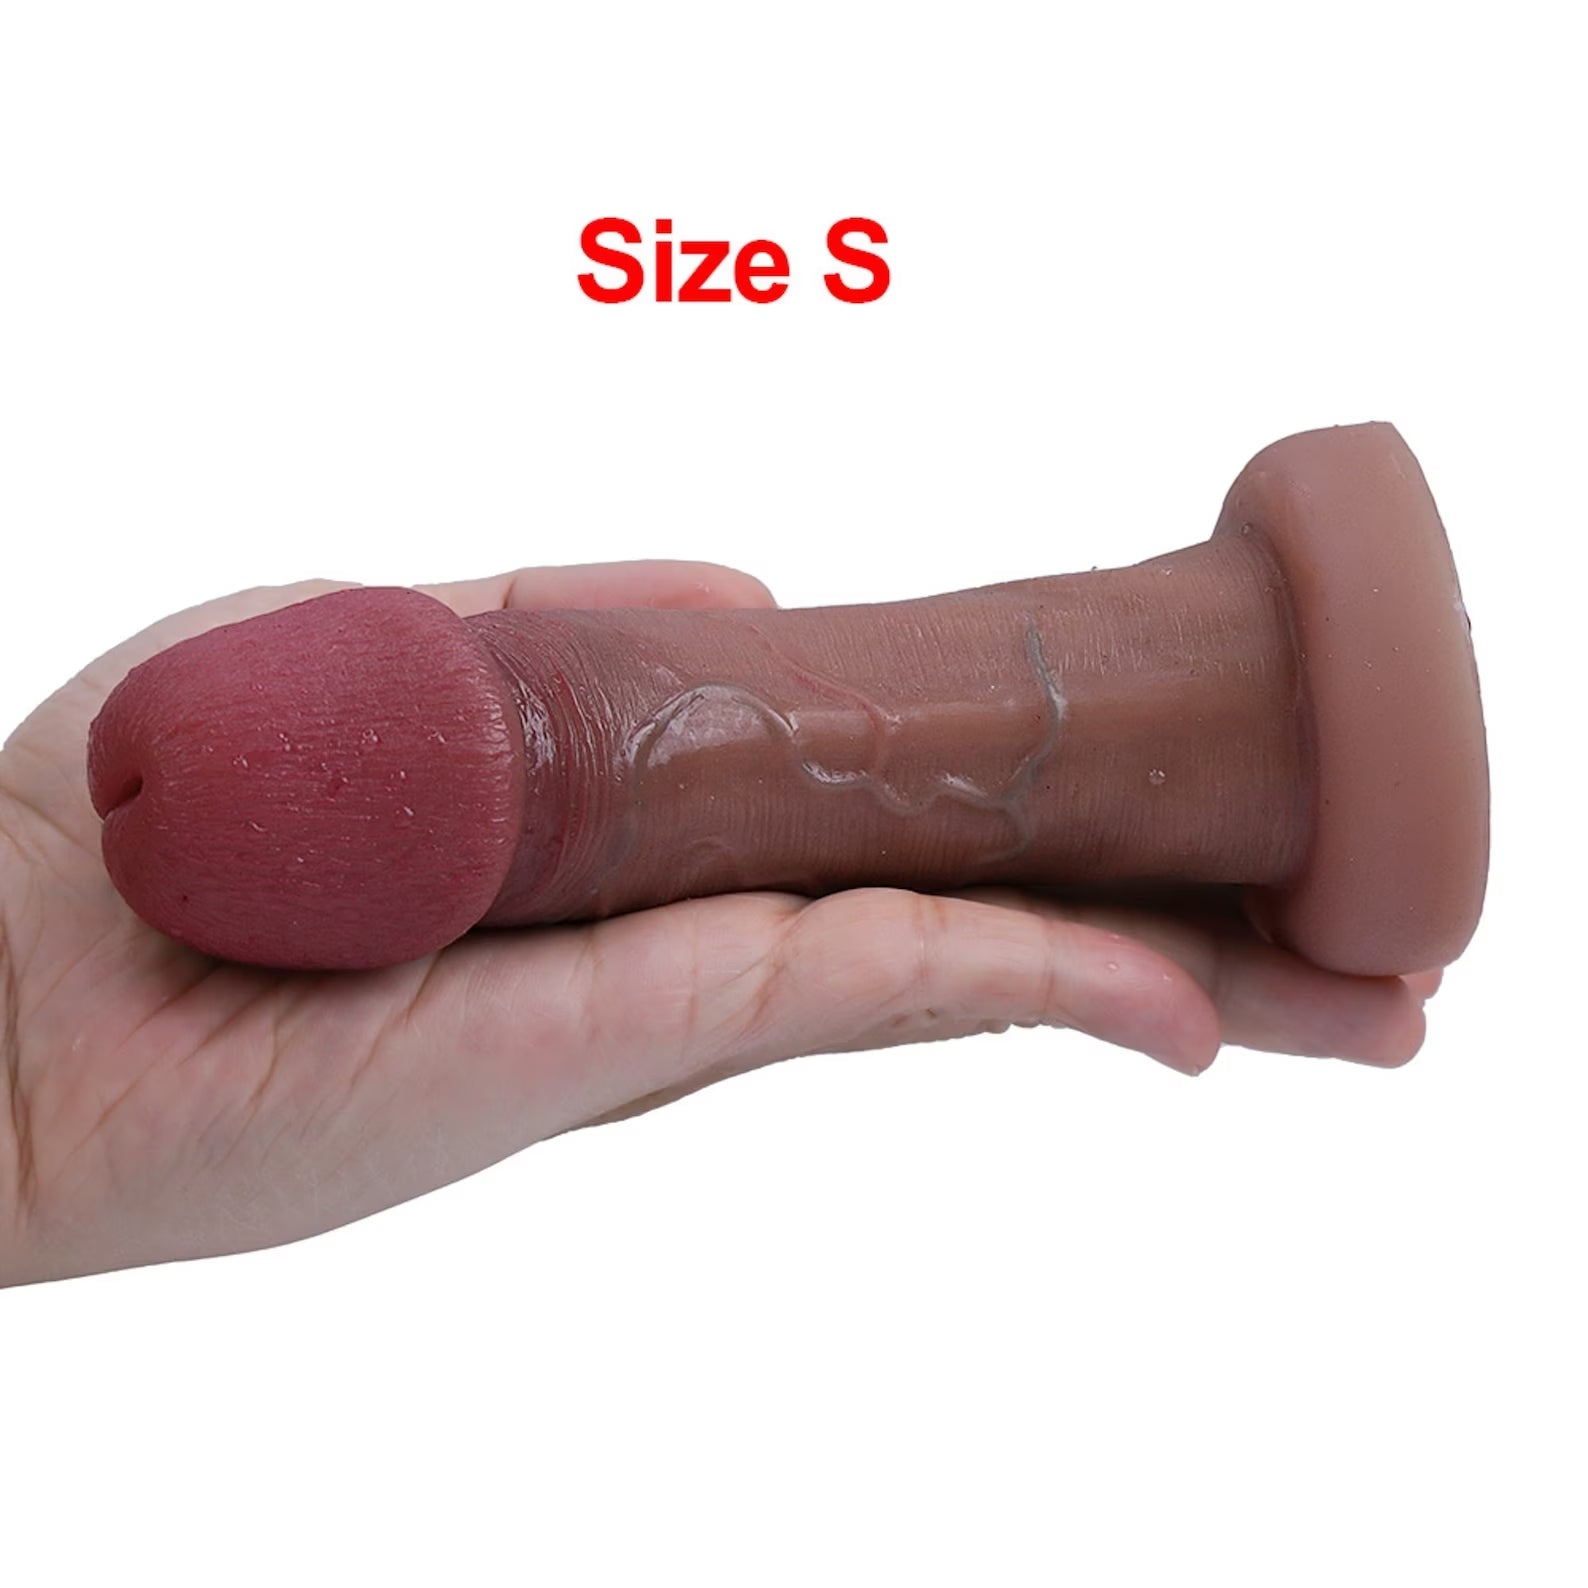 Very realistic dildo with big glans 6.7 inches